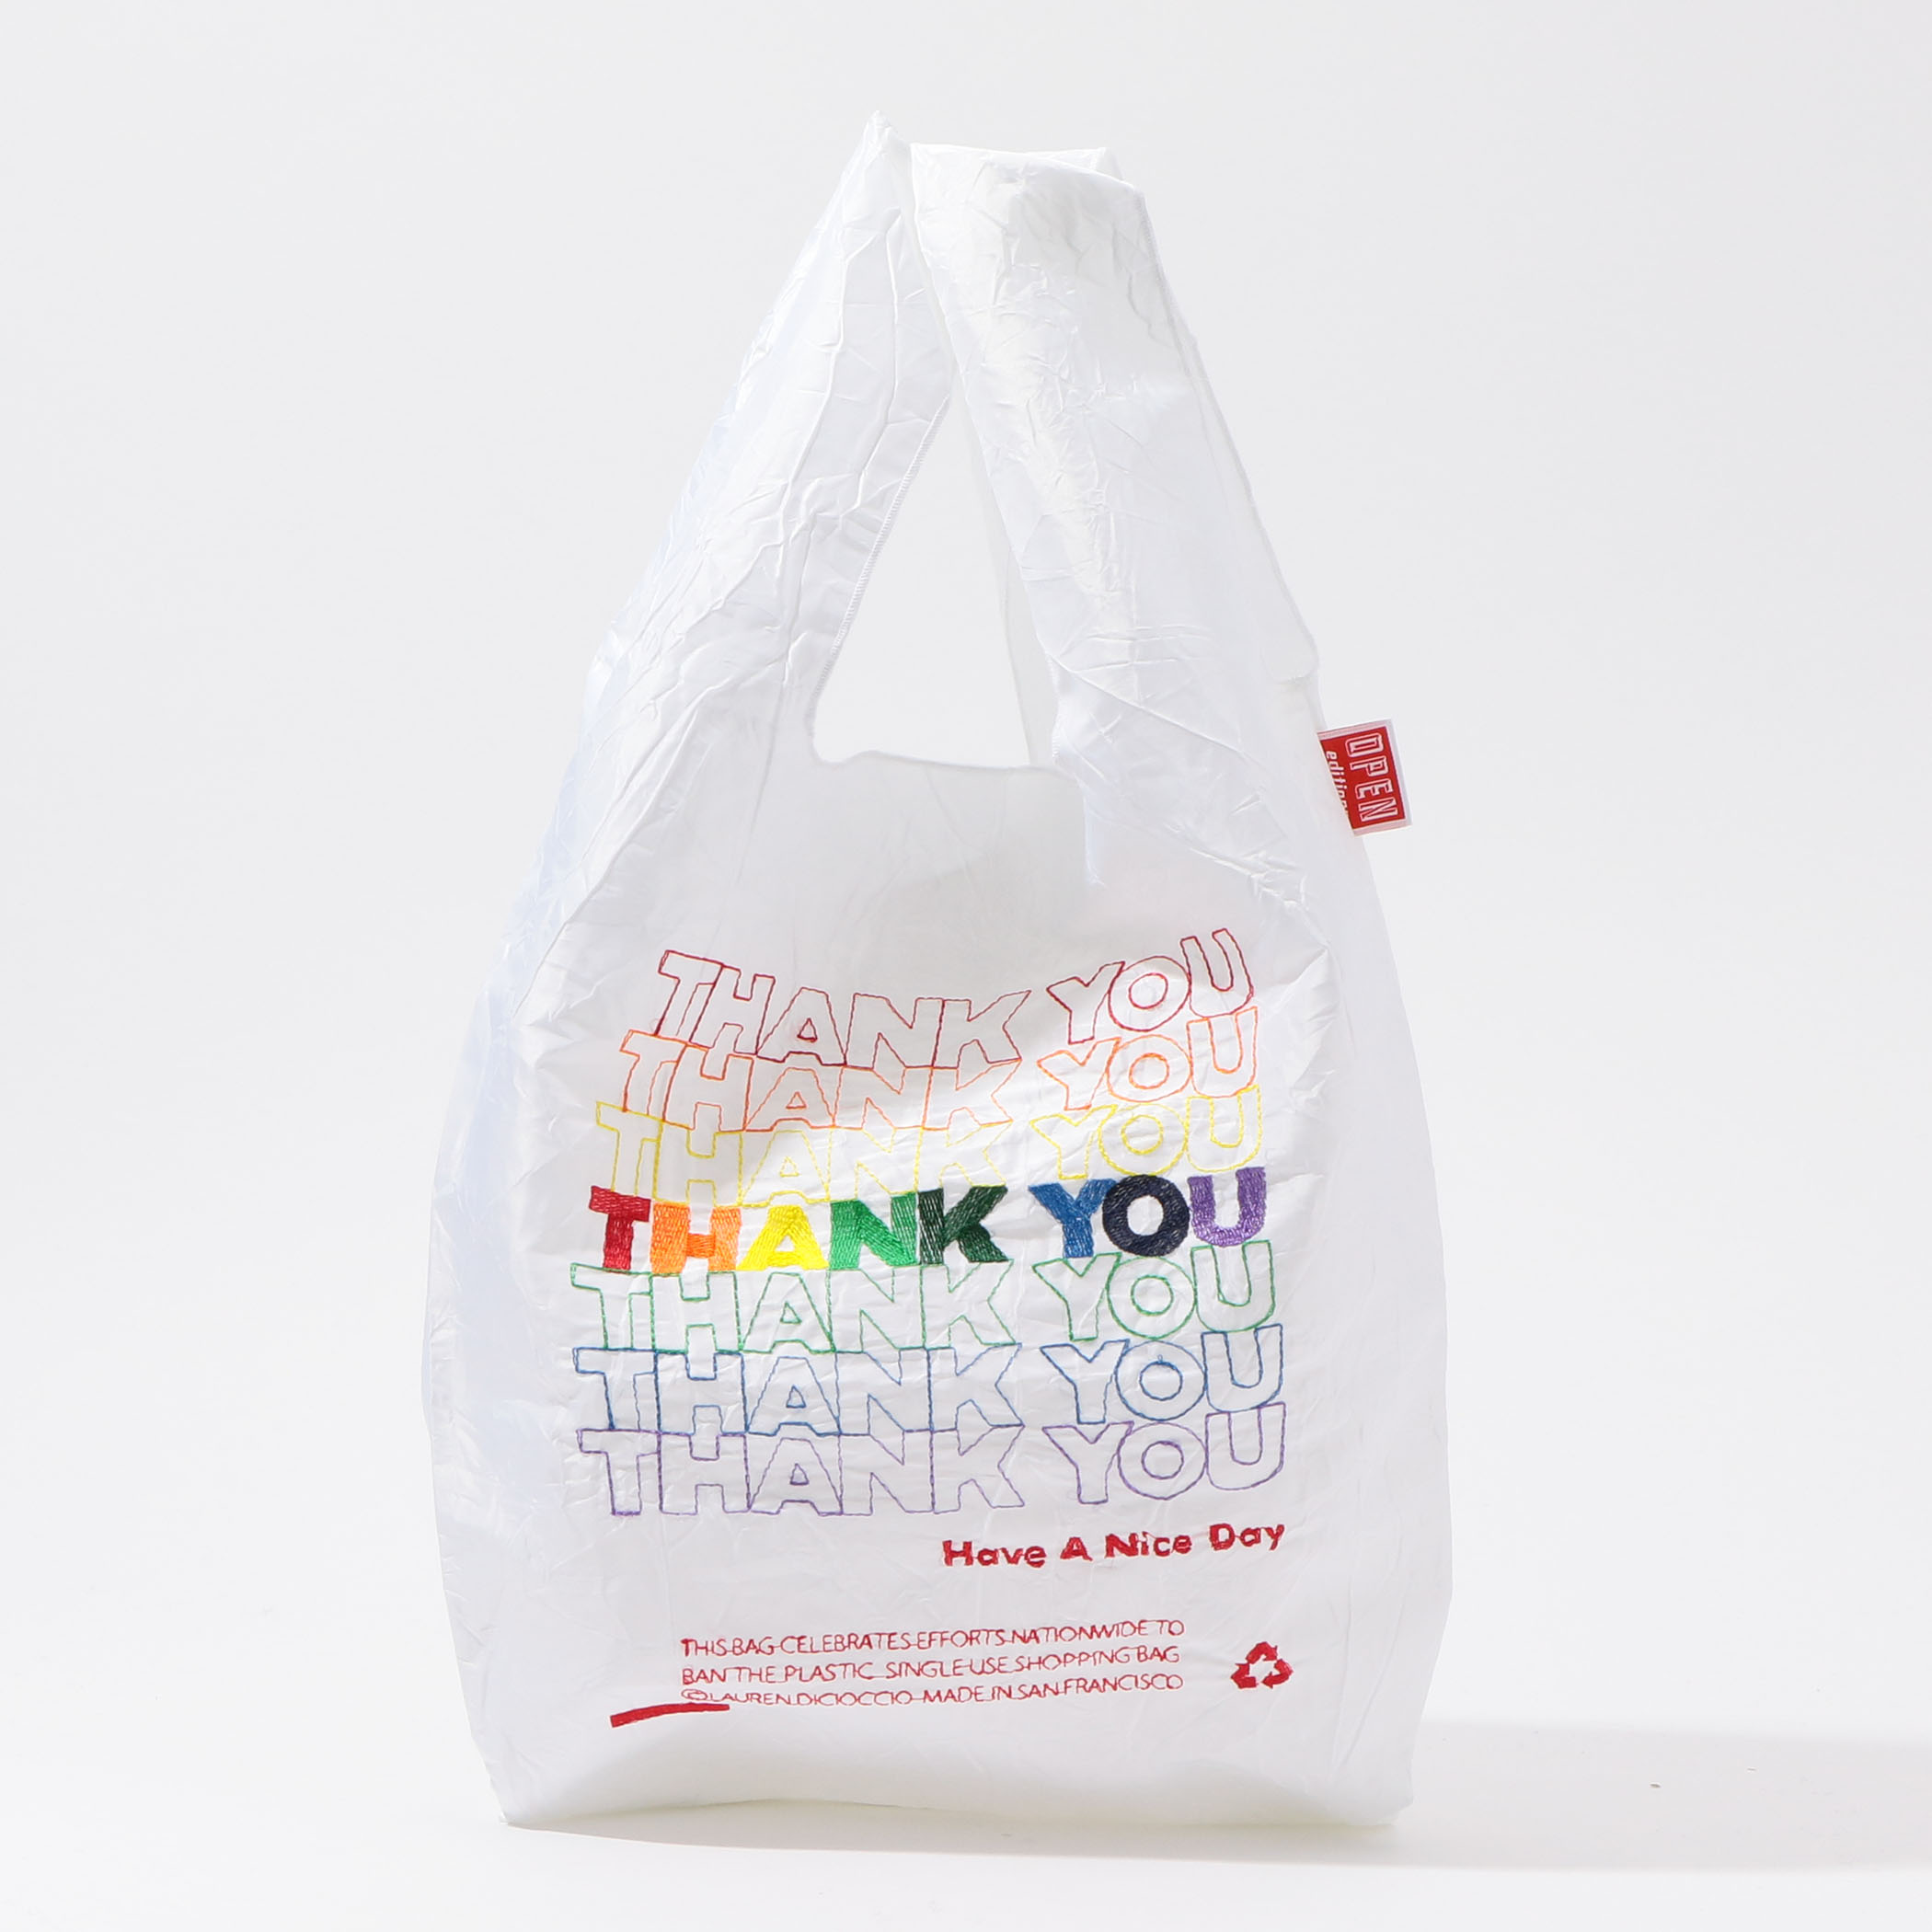 OPEN EDITIONS THANK YOU RAINBOW TOTE BAG